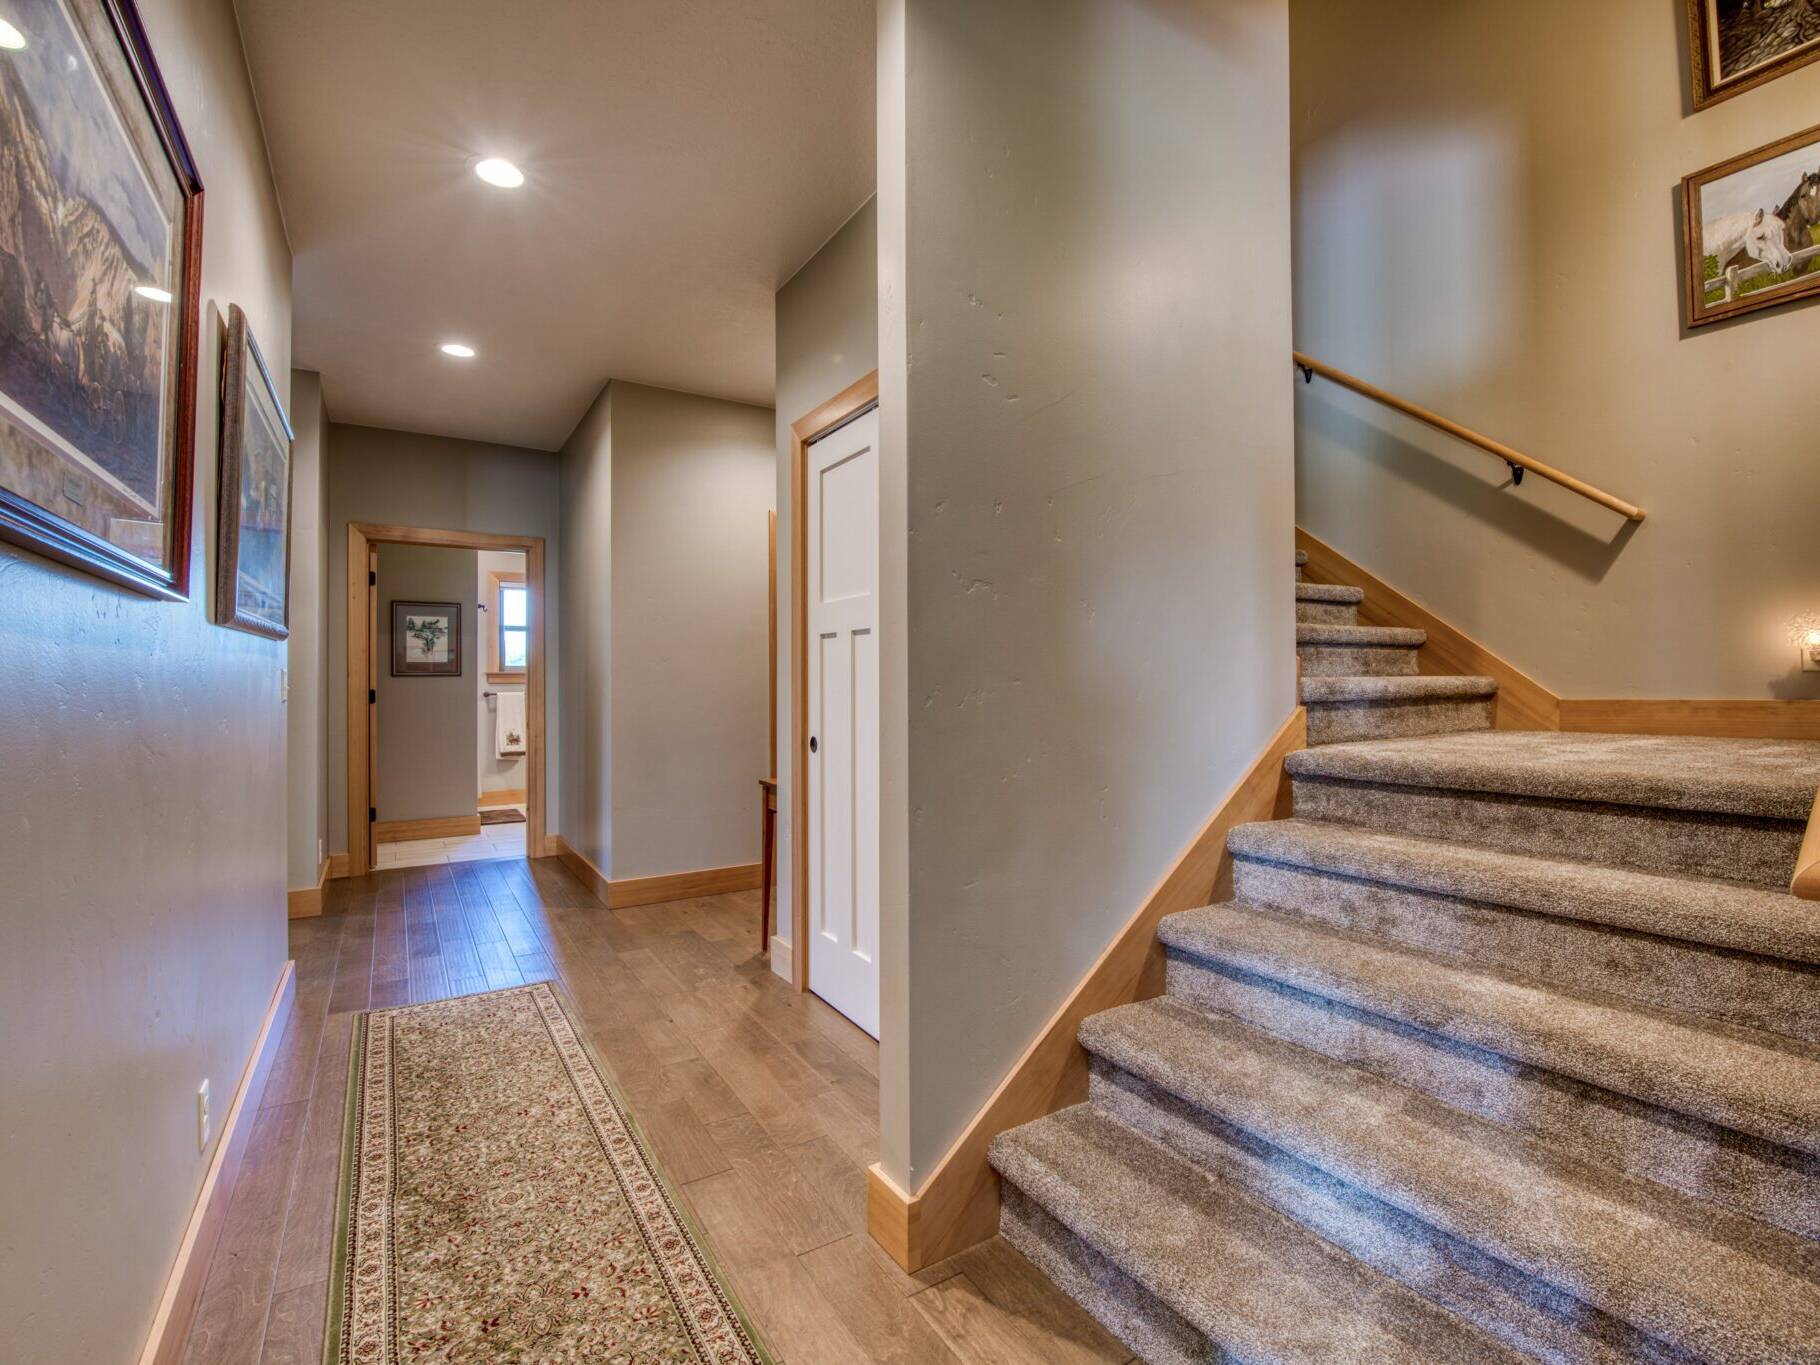 Hallway and carpeted stairs in a custom home near Hamilton, MT.